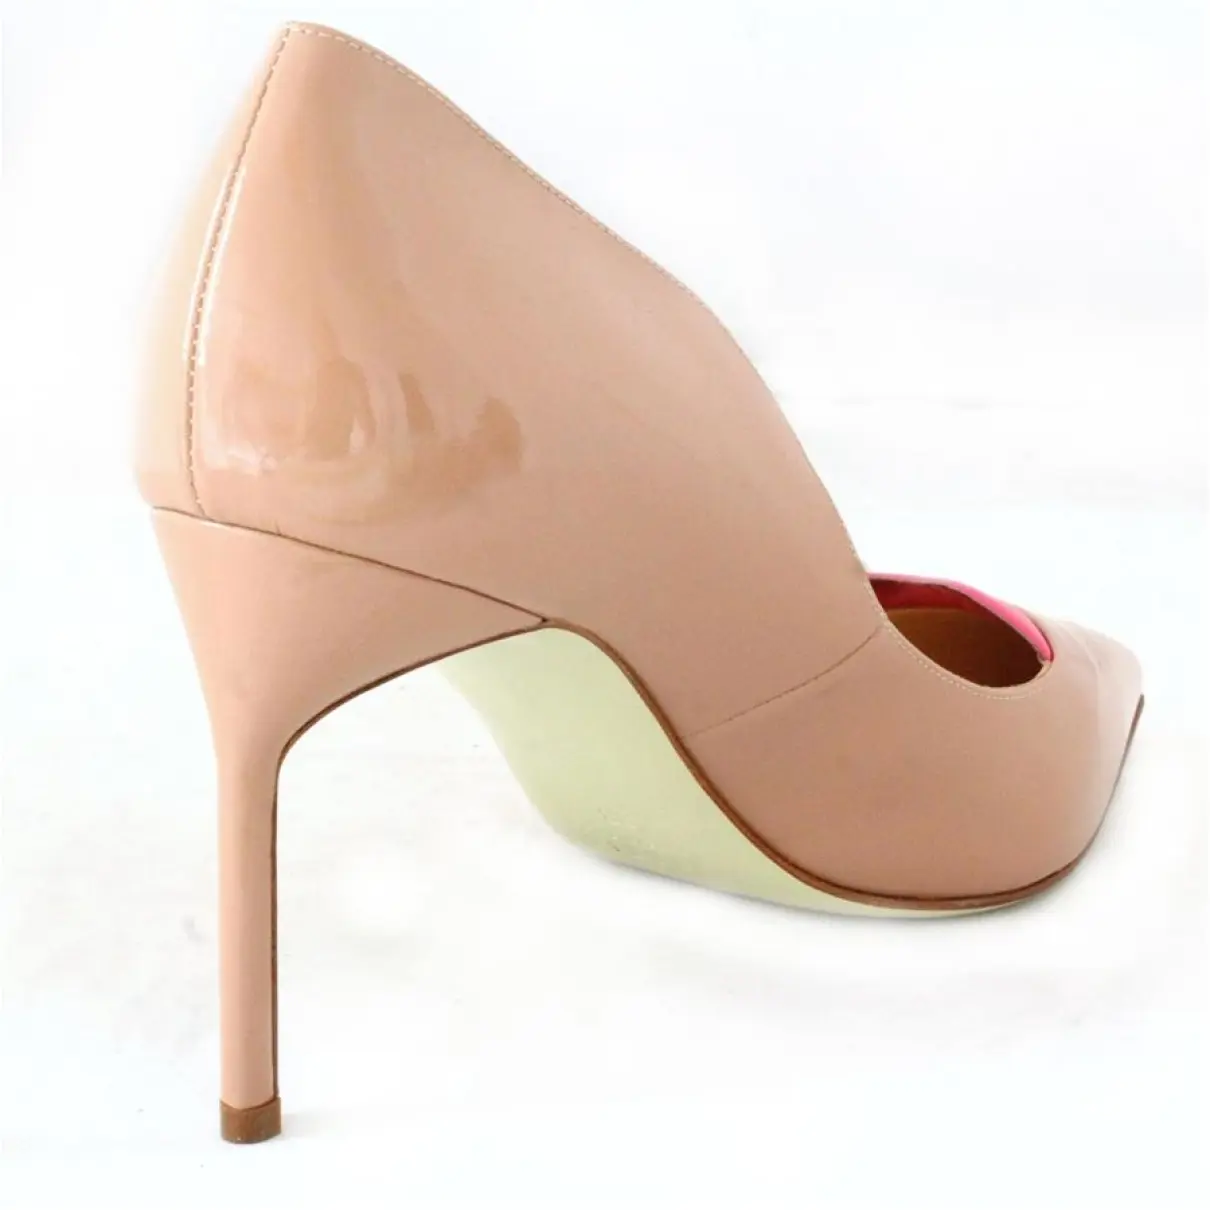 Giannico Patent leather heels for sale